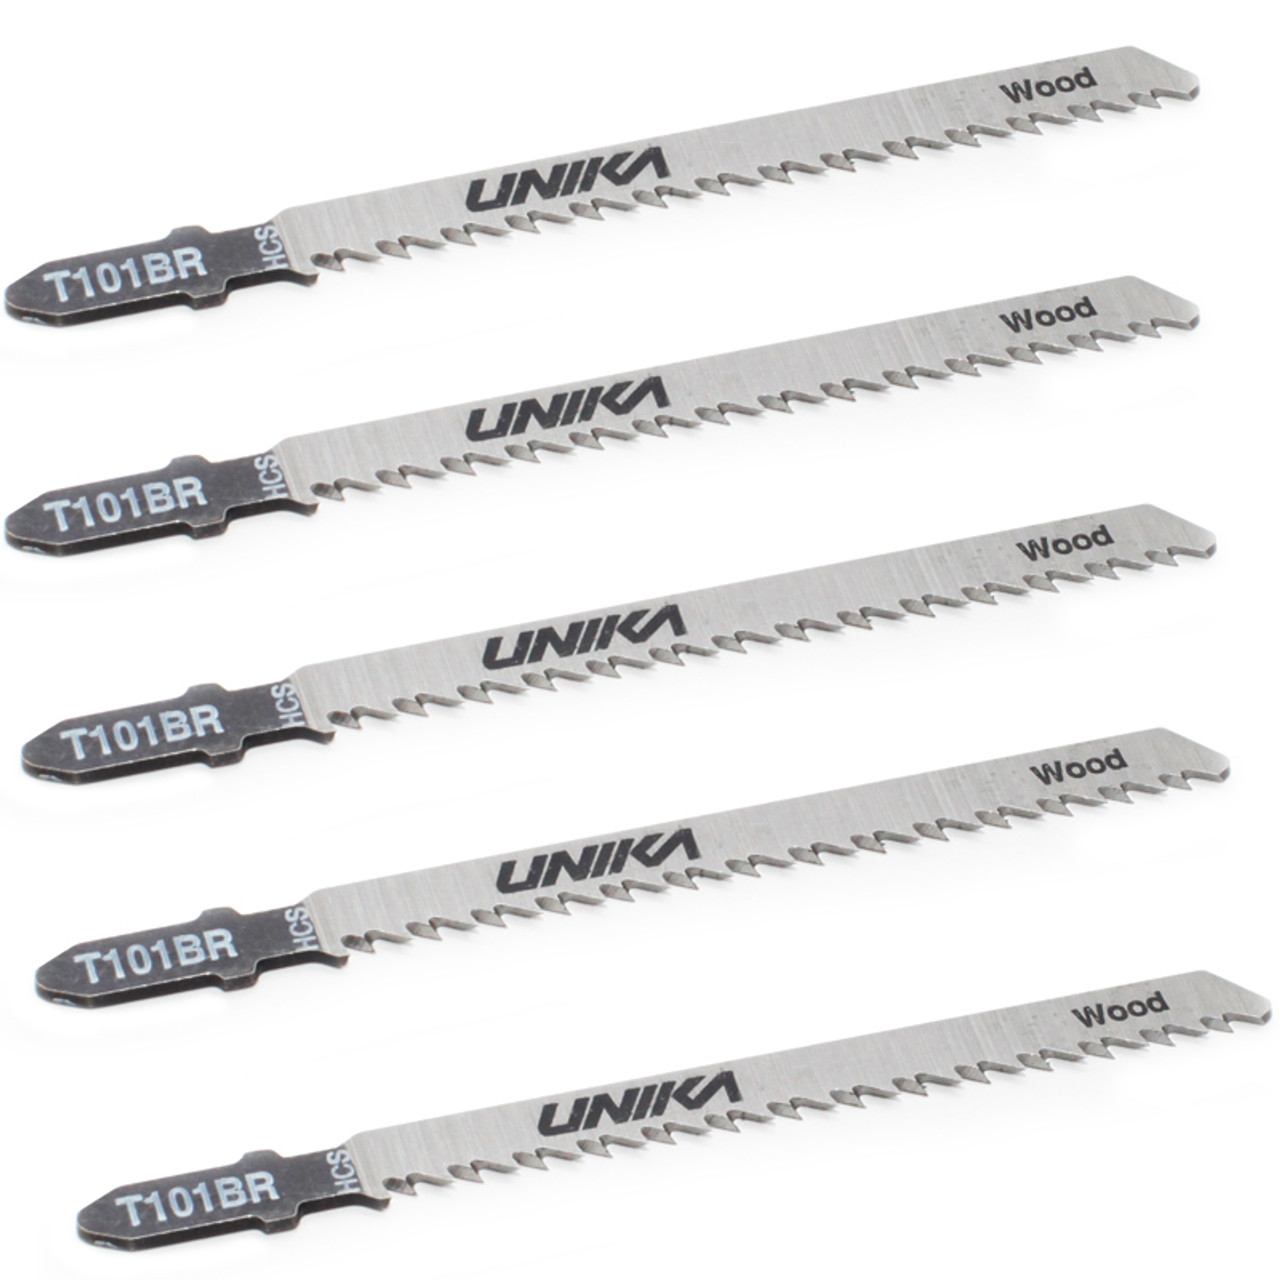 Buy Jig Saw Blade T101br 5pcs Unika At Busy Bee Tools